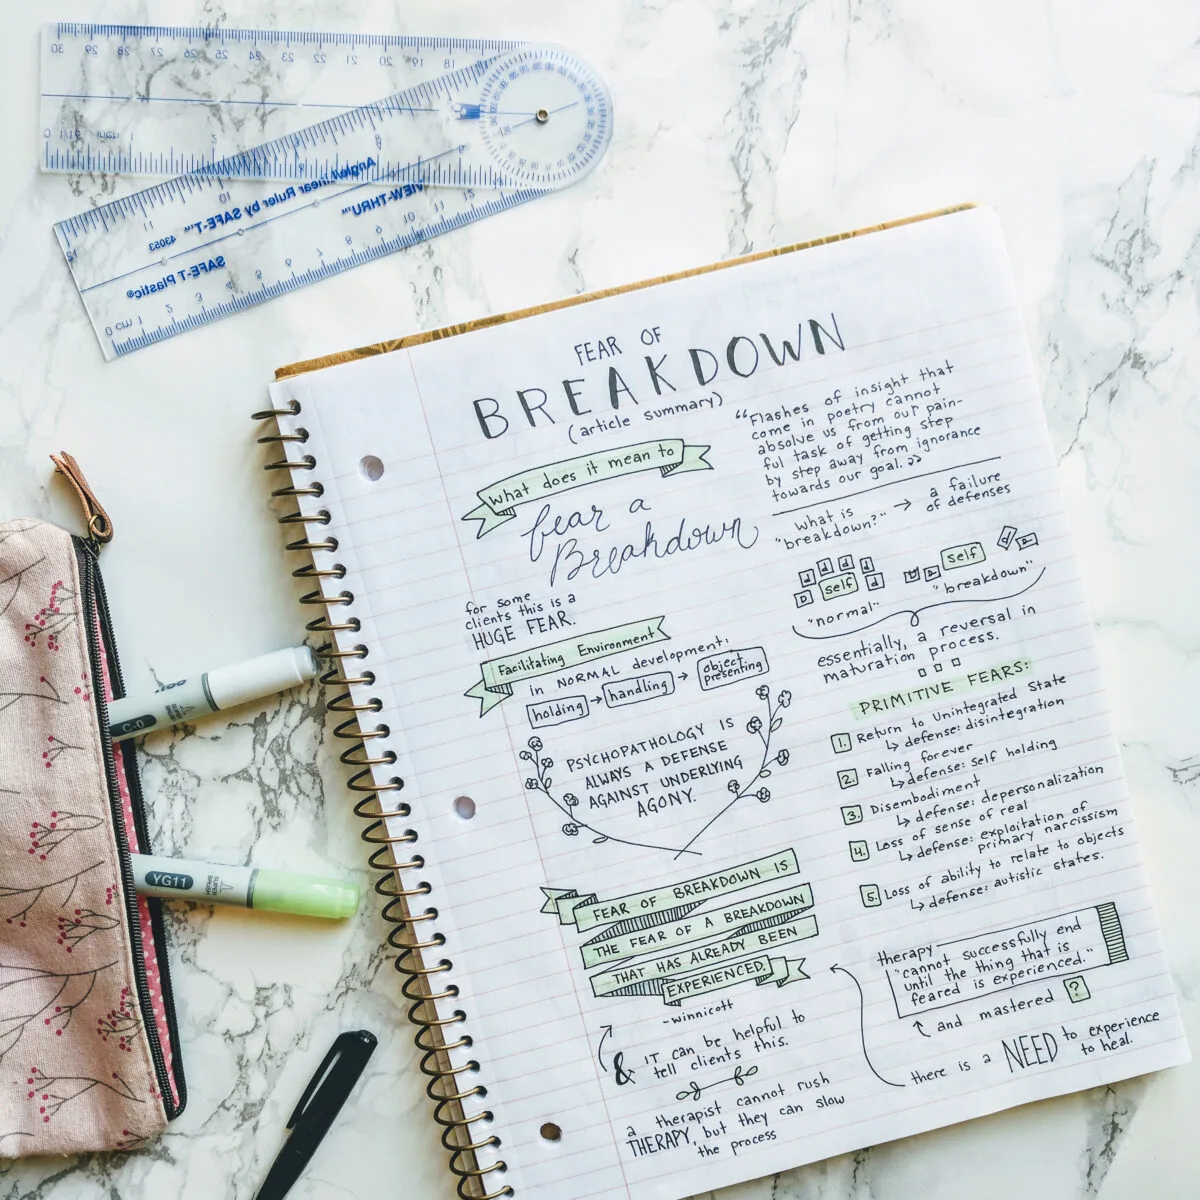 Psychology course notes created with artful drawings shown in a pretty flat lay photograph.